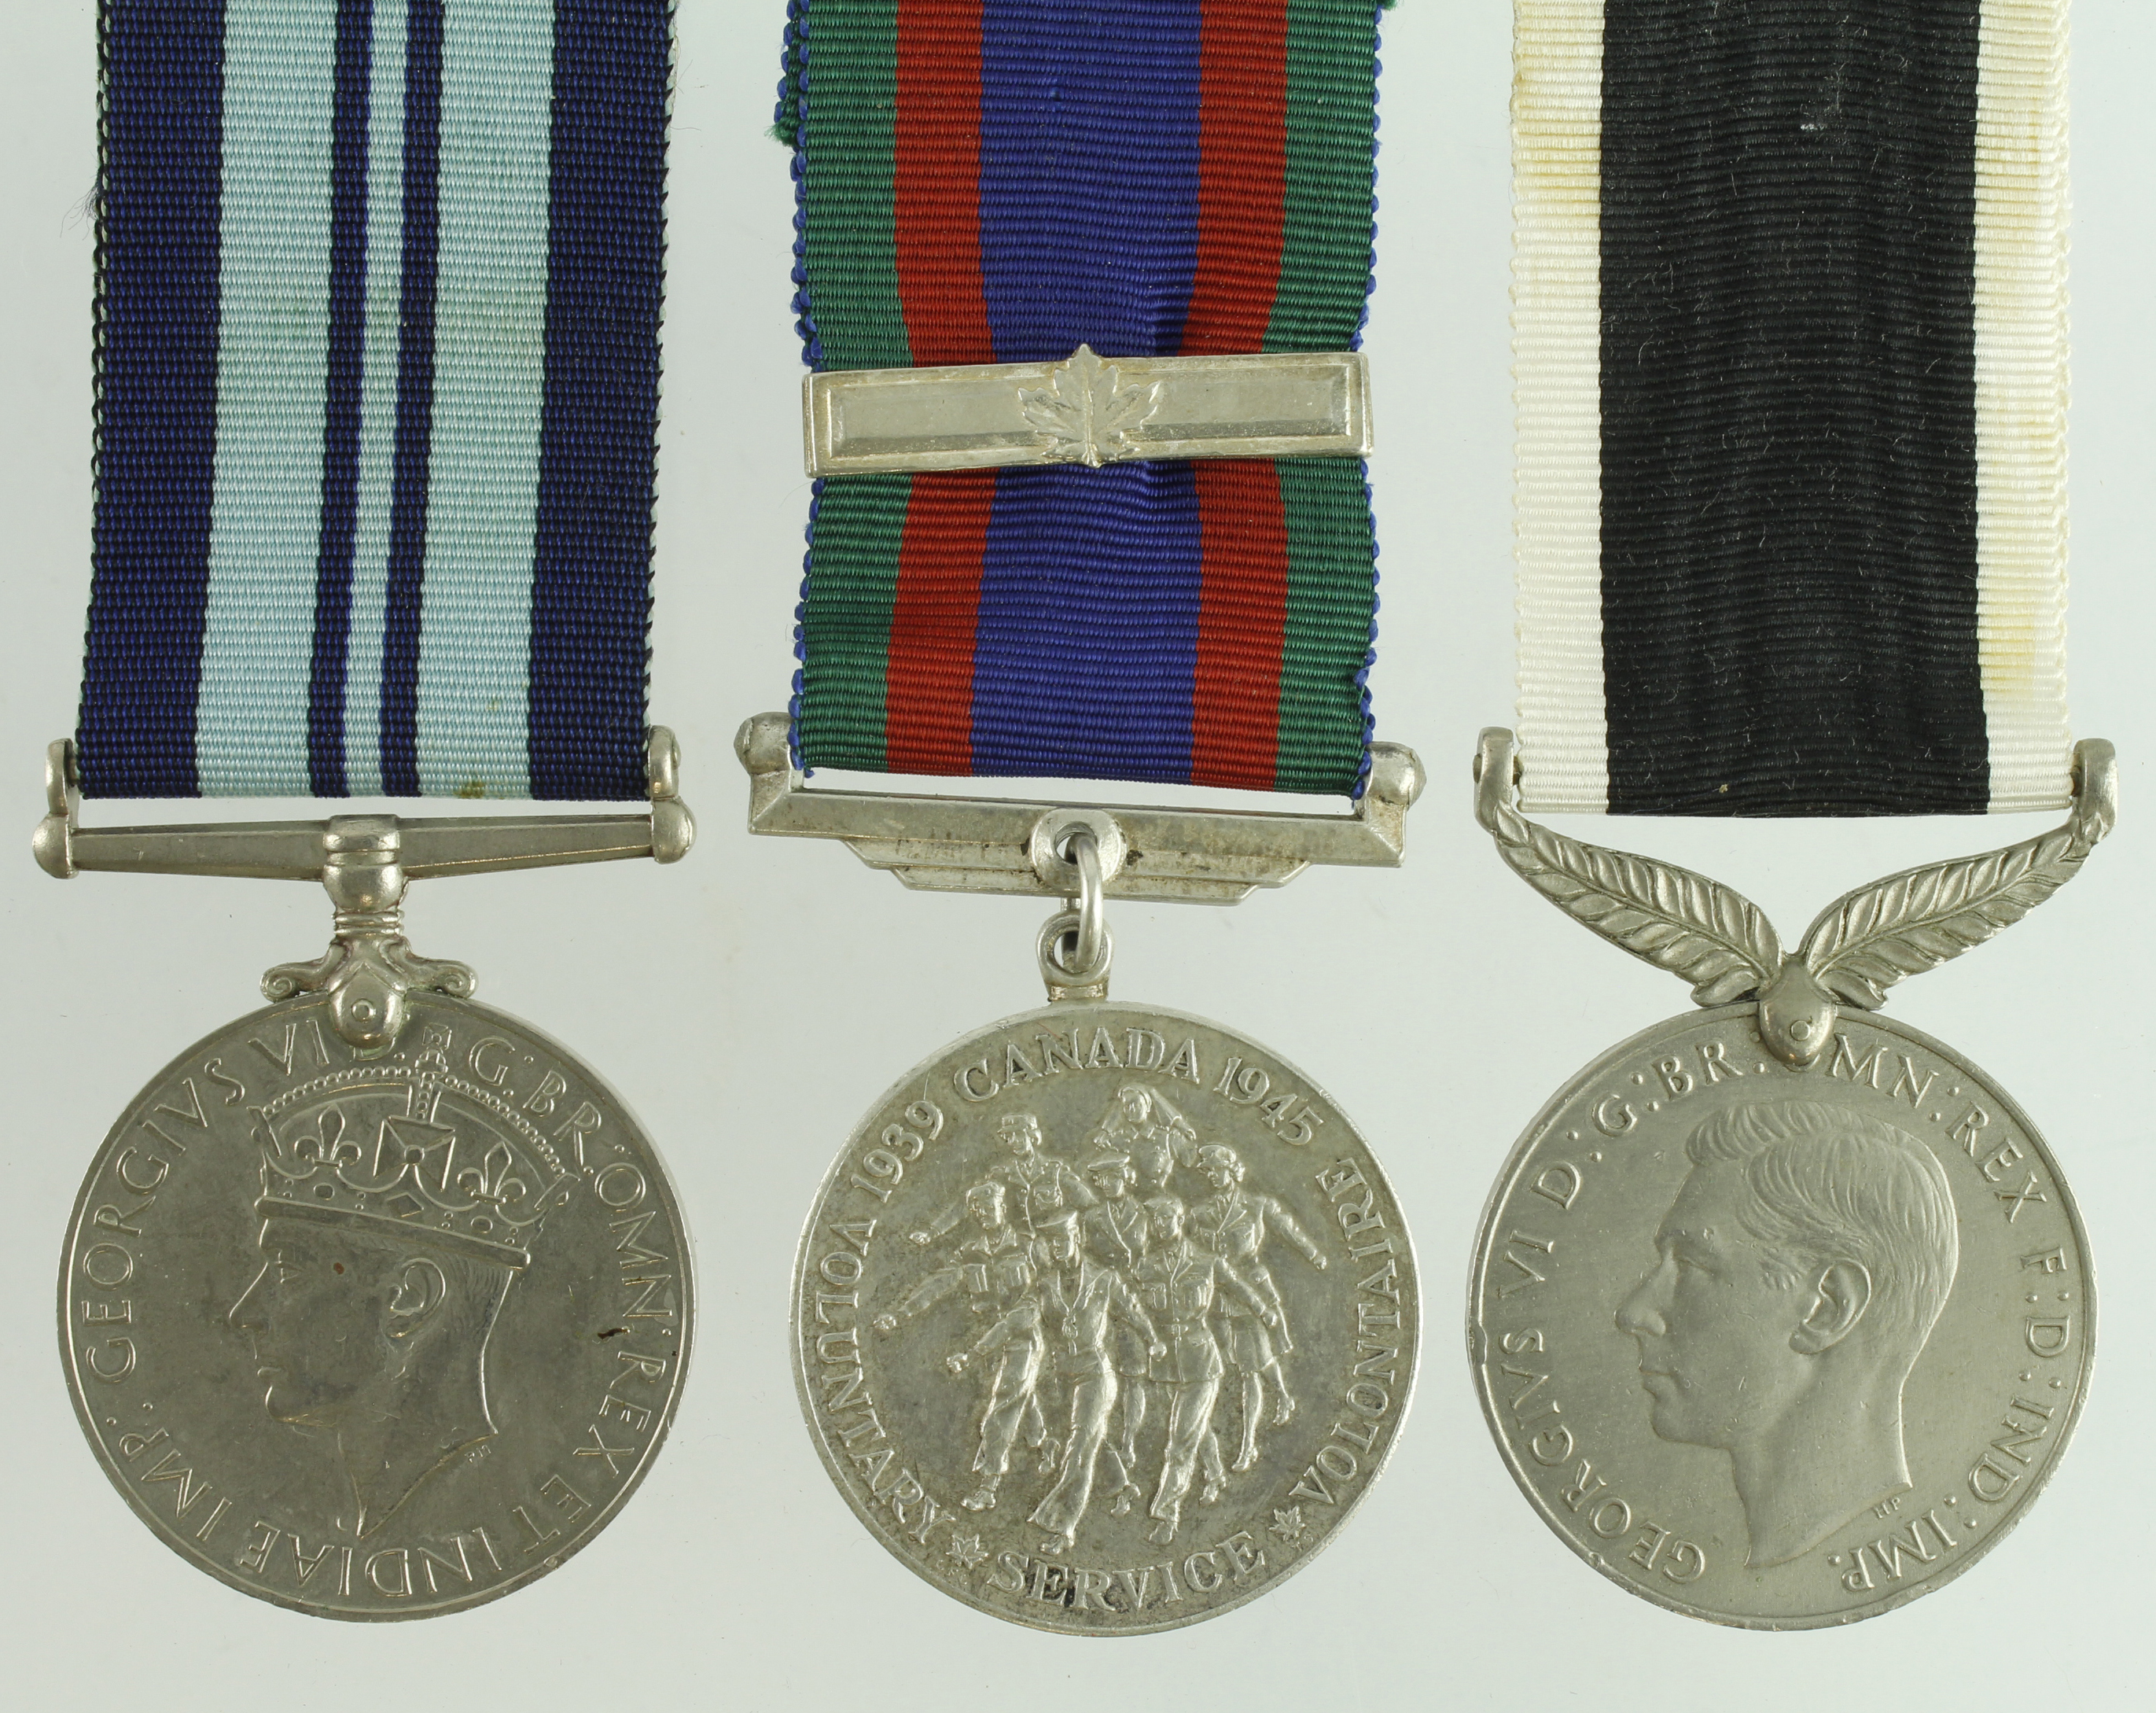 New Zealand Service Medal 1939-45, India Medal 1939-45, and Canadian Voluntary Service Medal 1939-45